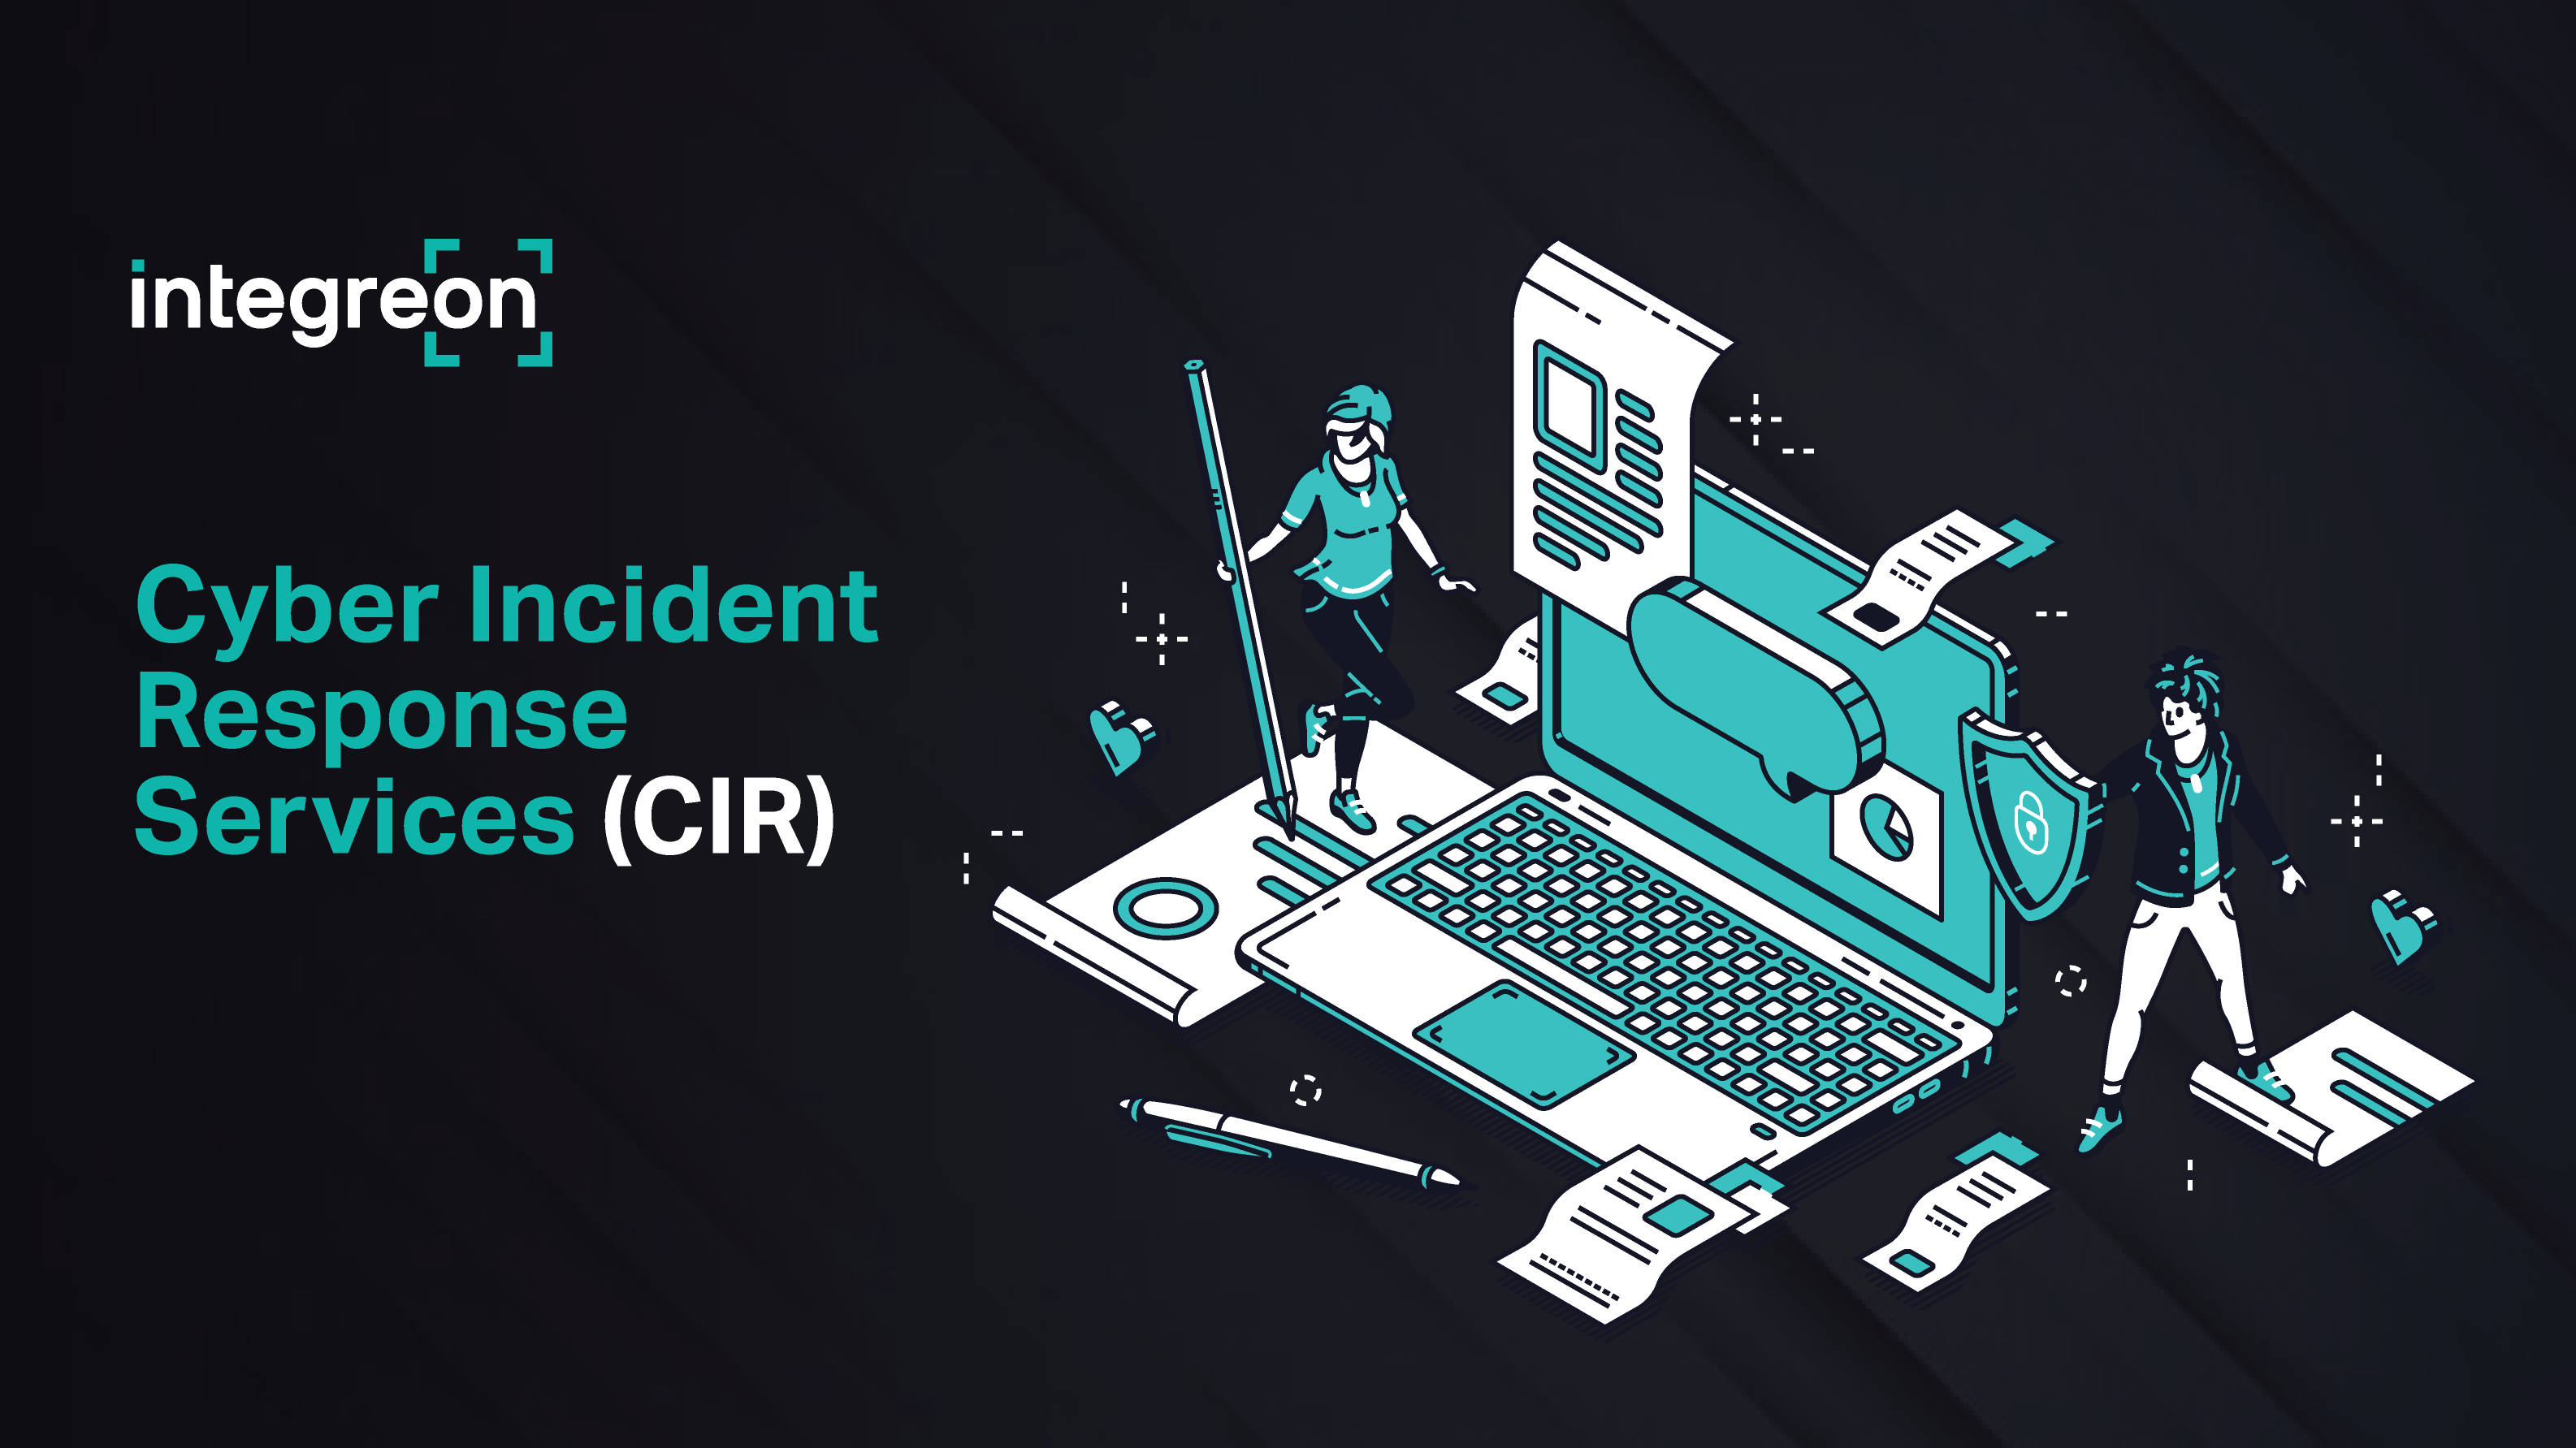 In Expansion of its Breach Response Capabilities, Integreon Adds Cyber Incident Notification Services